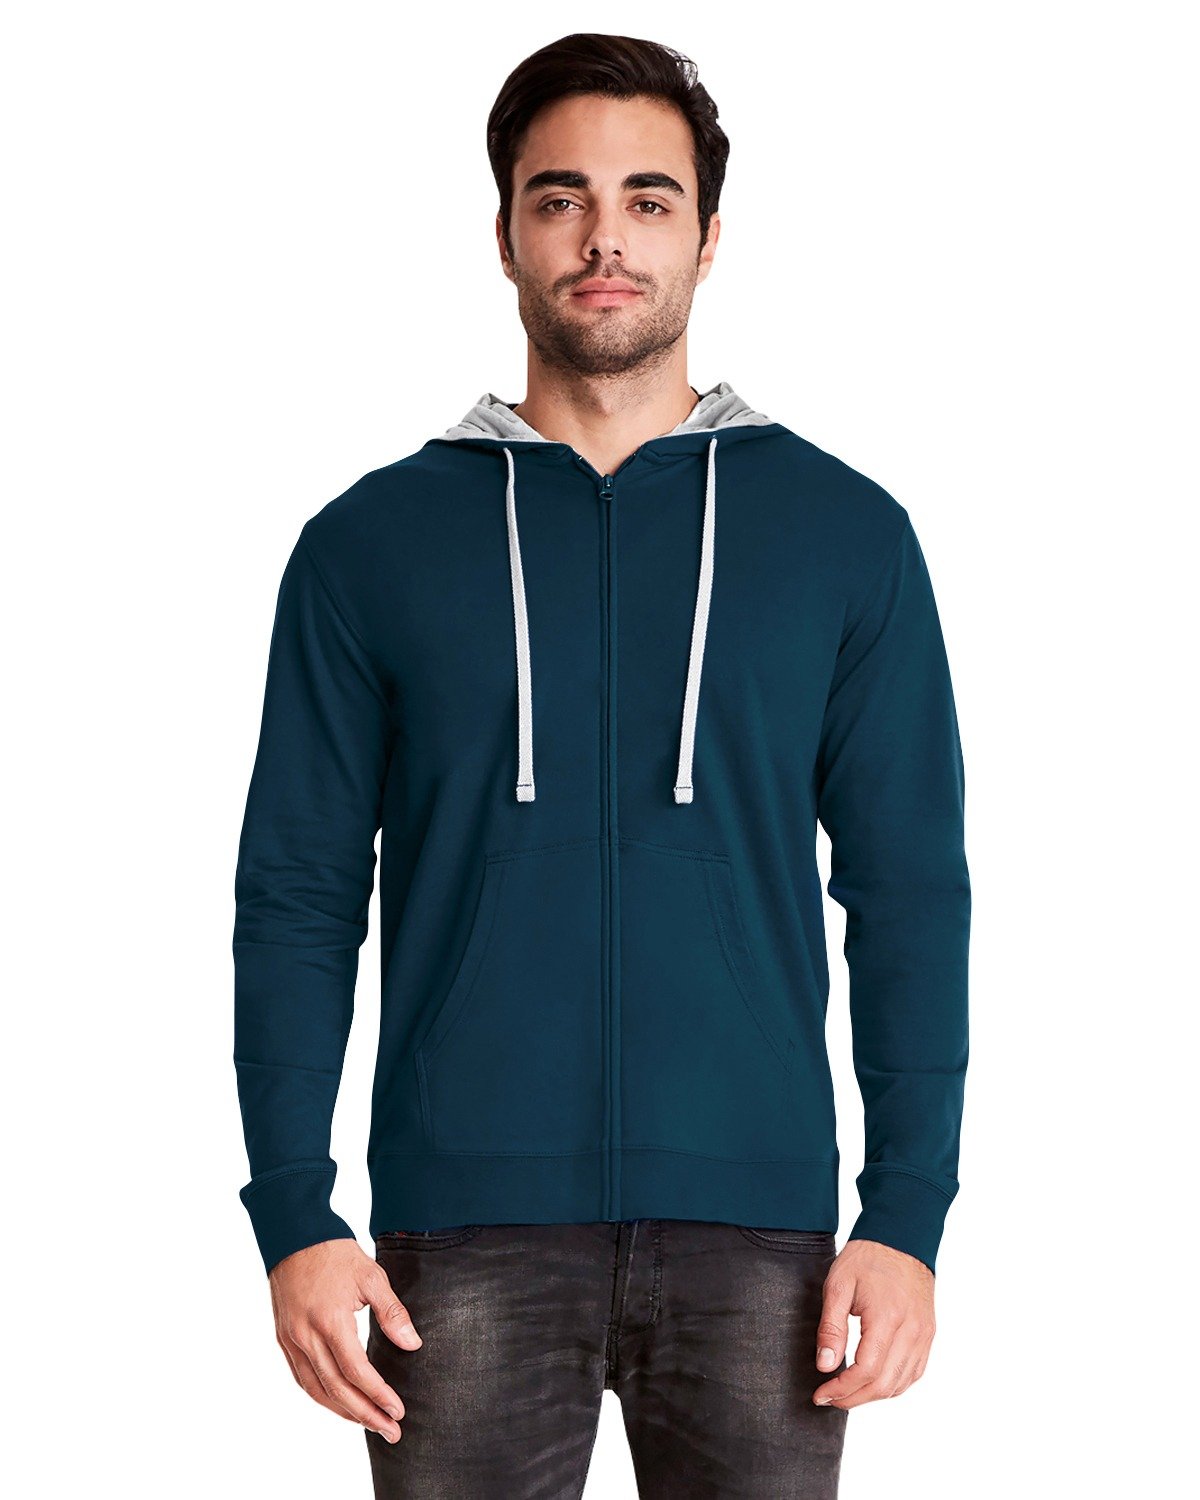 Next Level Adult Laguna French Terry Full-Zip Hooded Sweatshirt MID NVY/ HTH GRY 